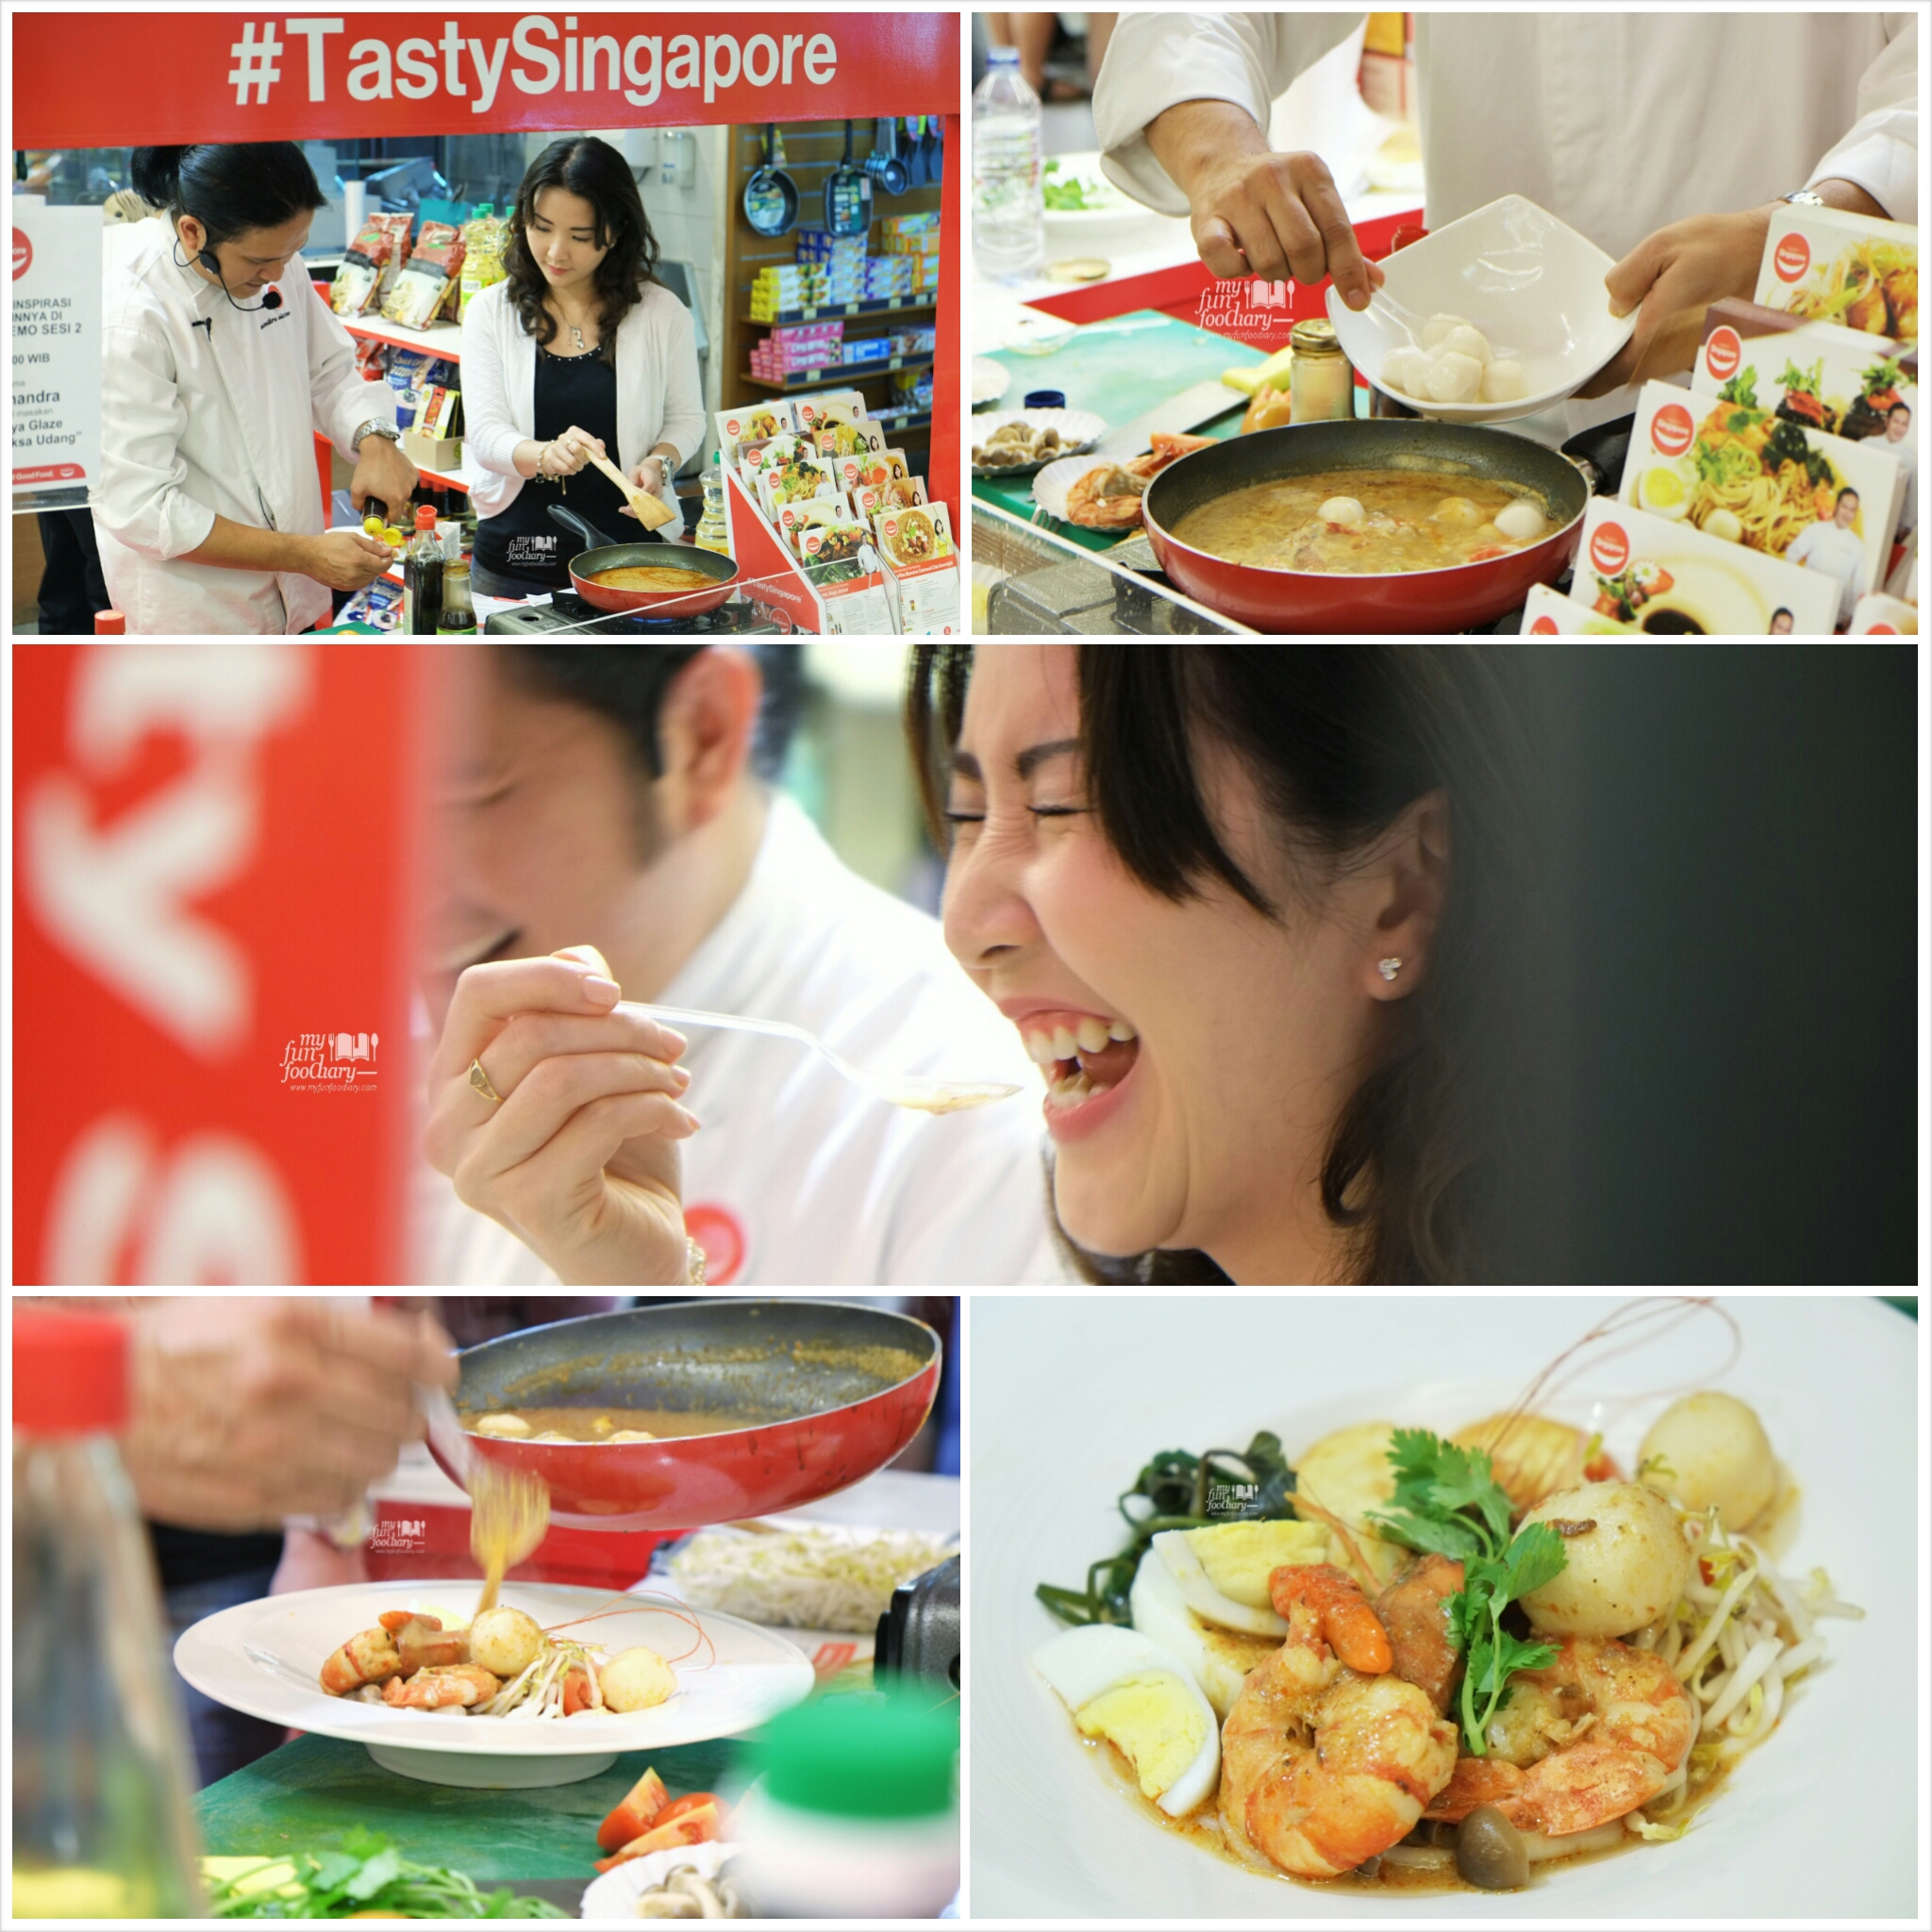 Cooking Laksa Udang with Chef Chandra at Tasty Singapore by Myfunfoodiary